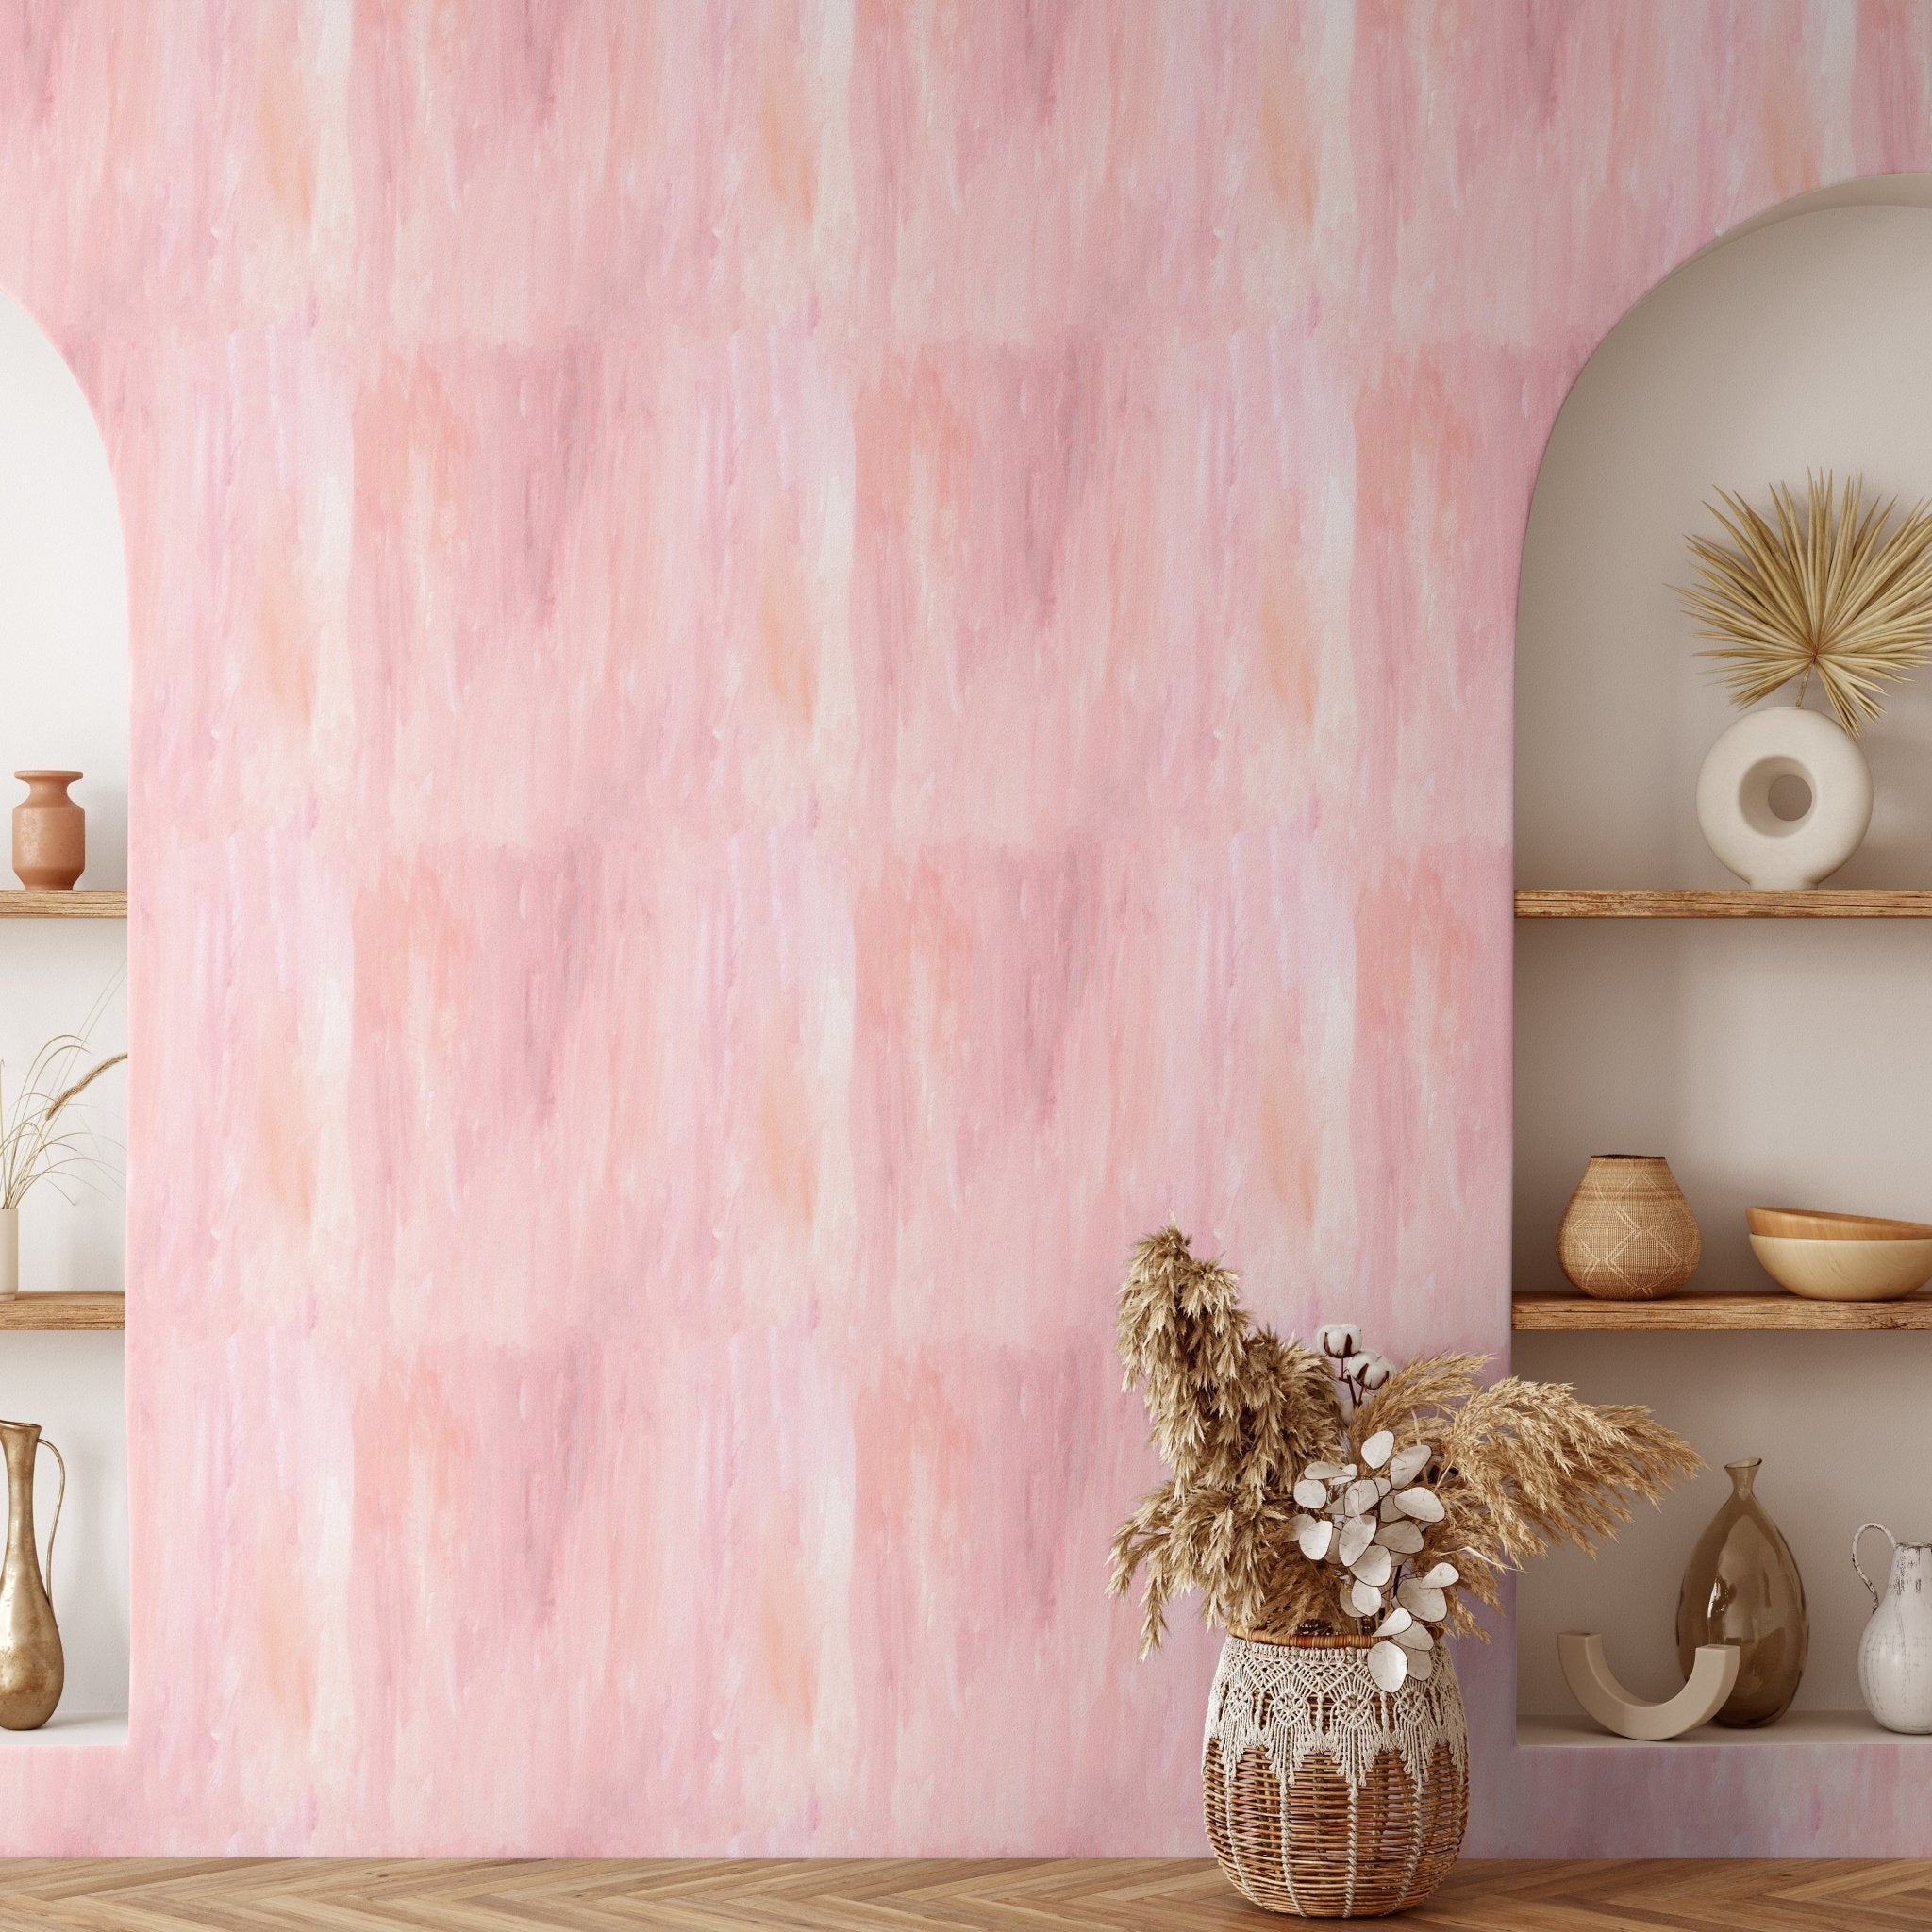 Textured Wallpaper, Pink Wallpaper, Peel and Stick, texture wall paper, removable wallpapers